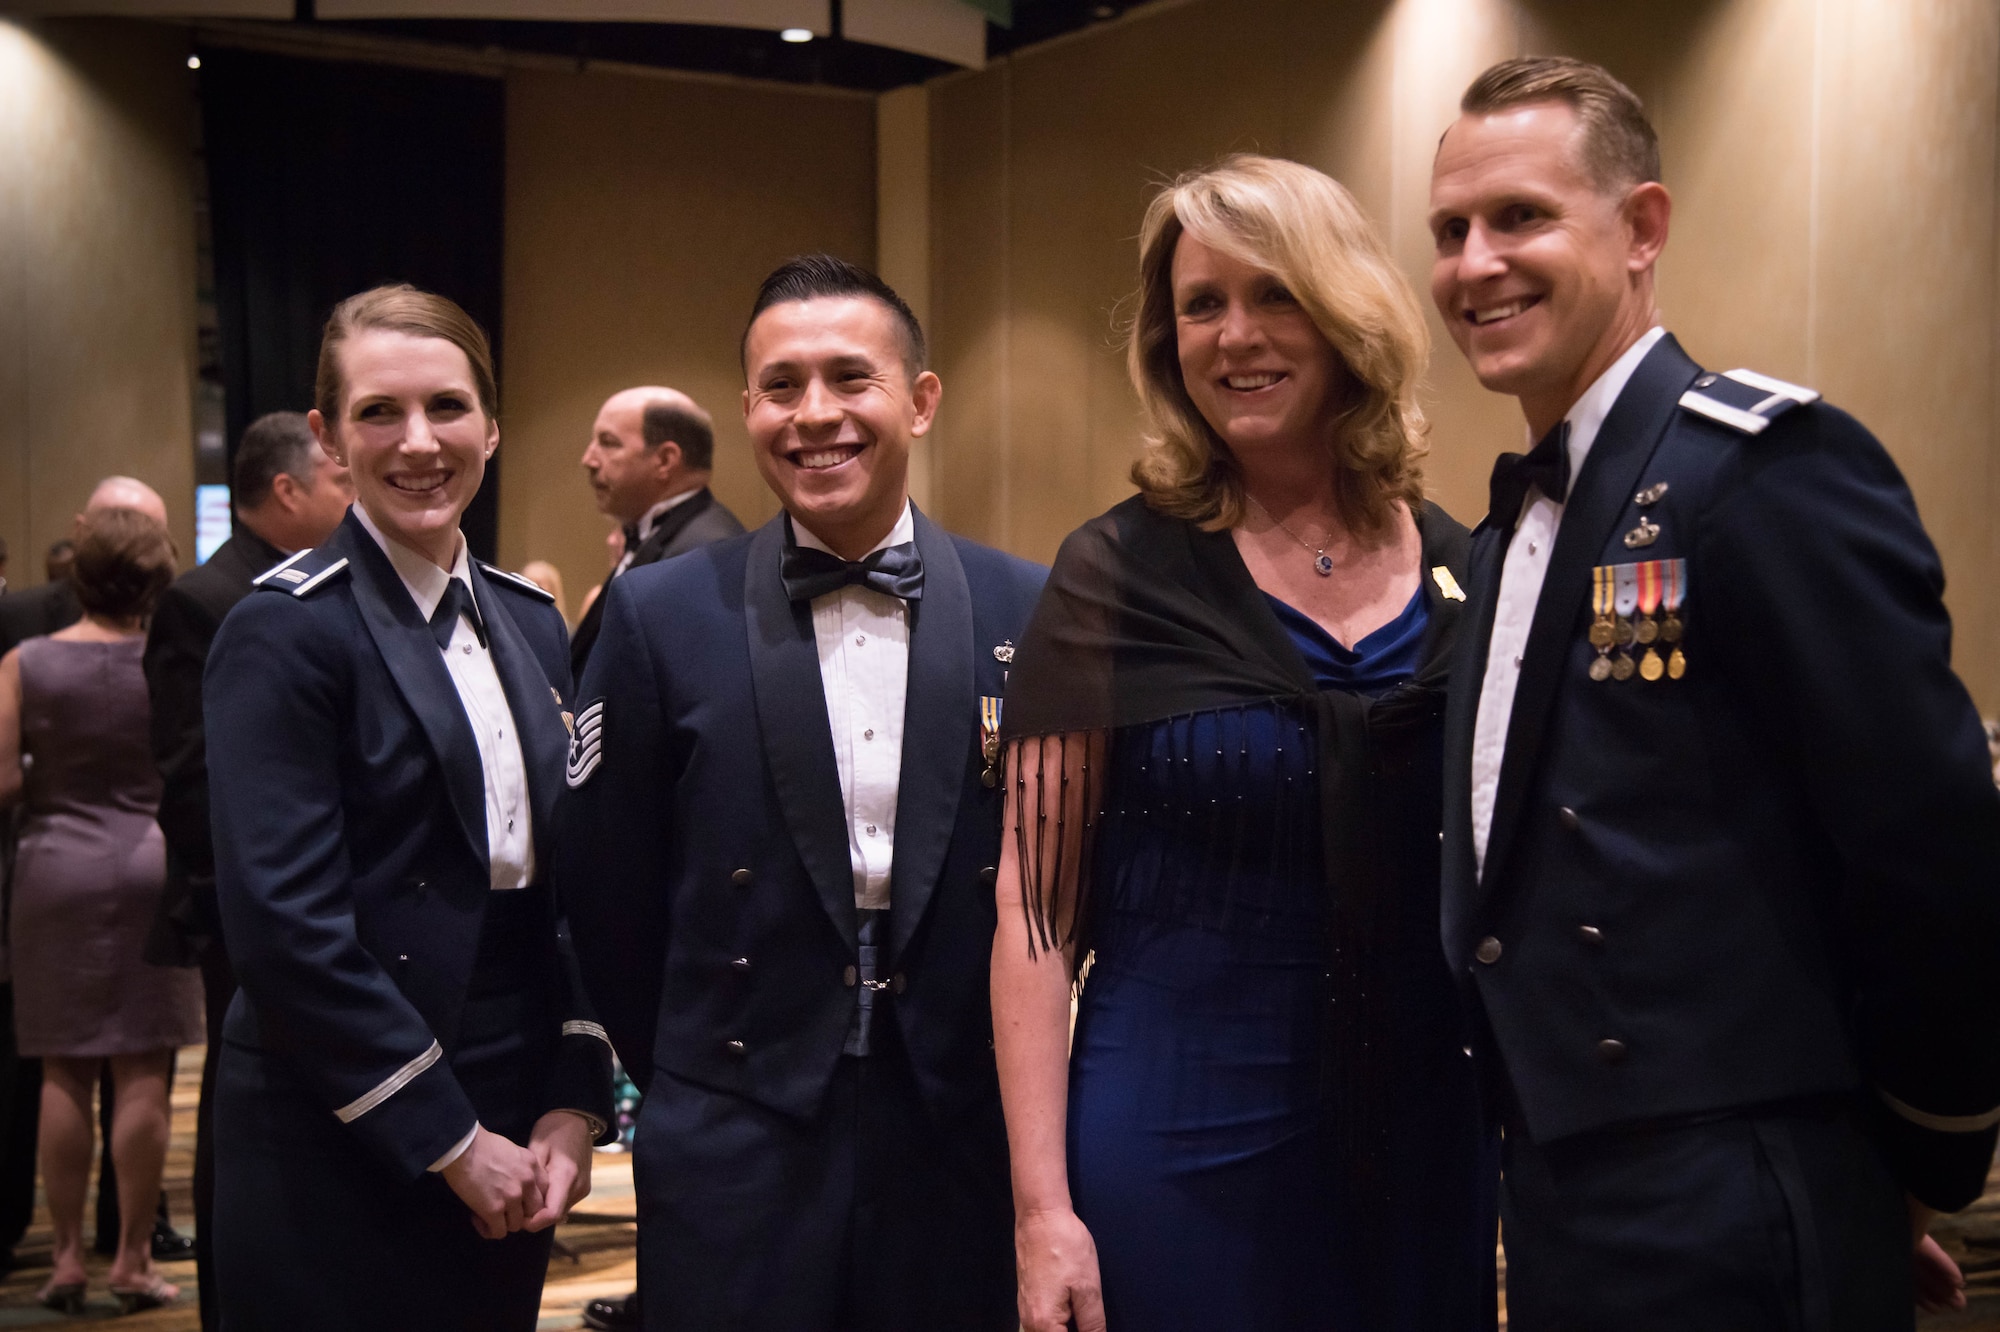 Secretary of the Air Force Deborah Lee James speaks
with Airmen from Keesler Air Force Base's 81st Training Wing during the 38th Annual Salute to the Military event at the Gulf Coast Convention Center in Biloxi Miss. Oct. 25.
(U.S. Air Force photo/Senior Airman Heather Heiney)